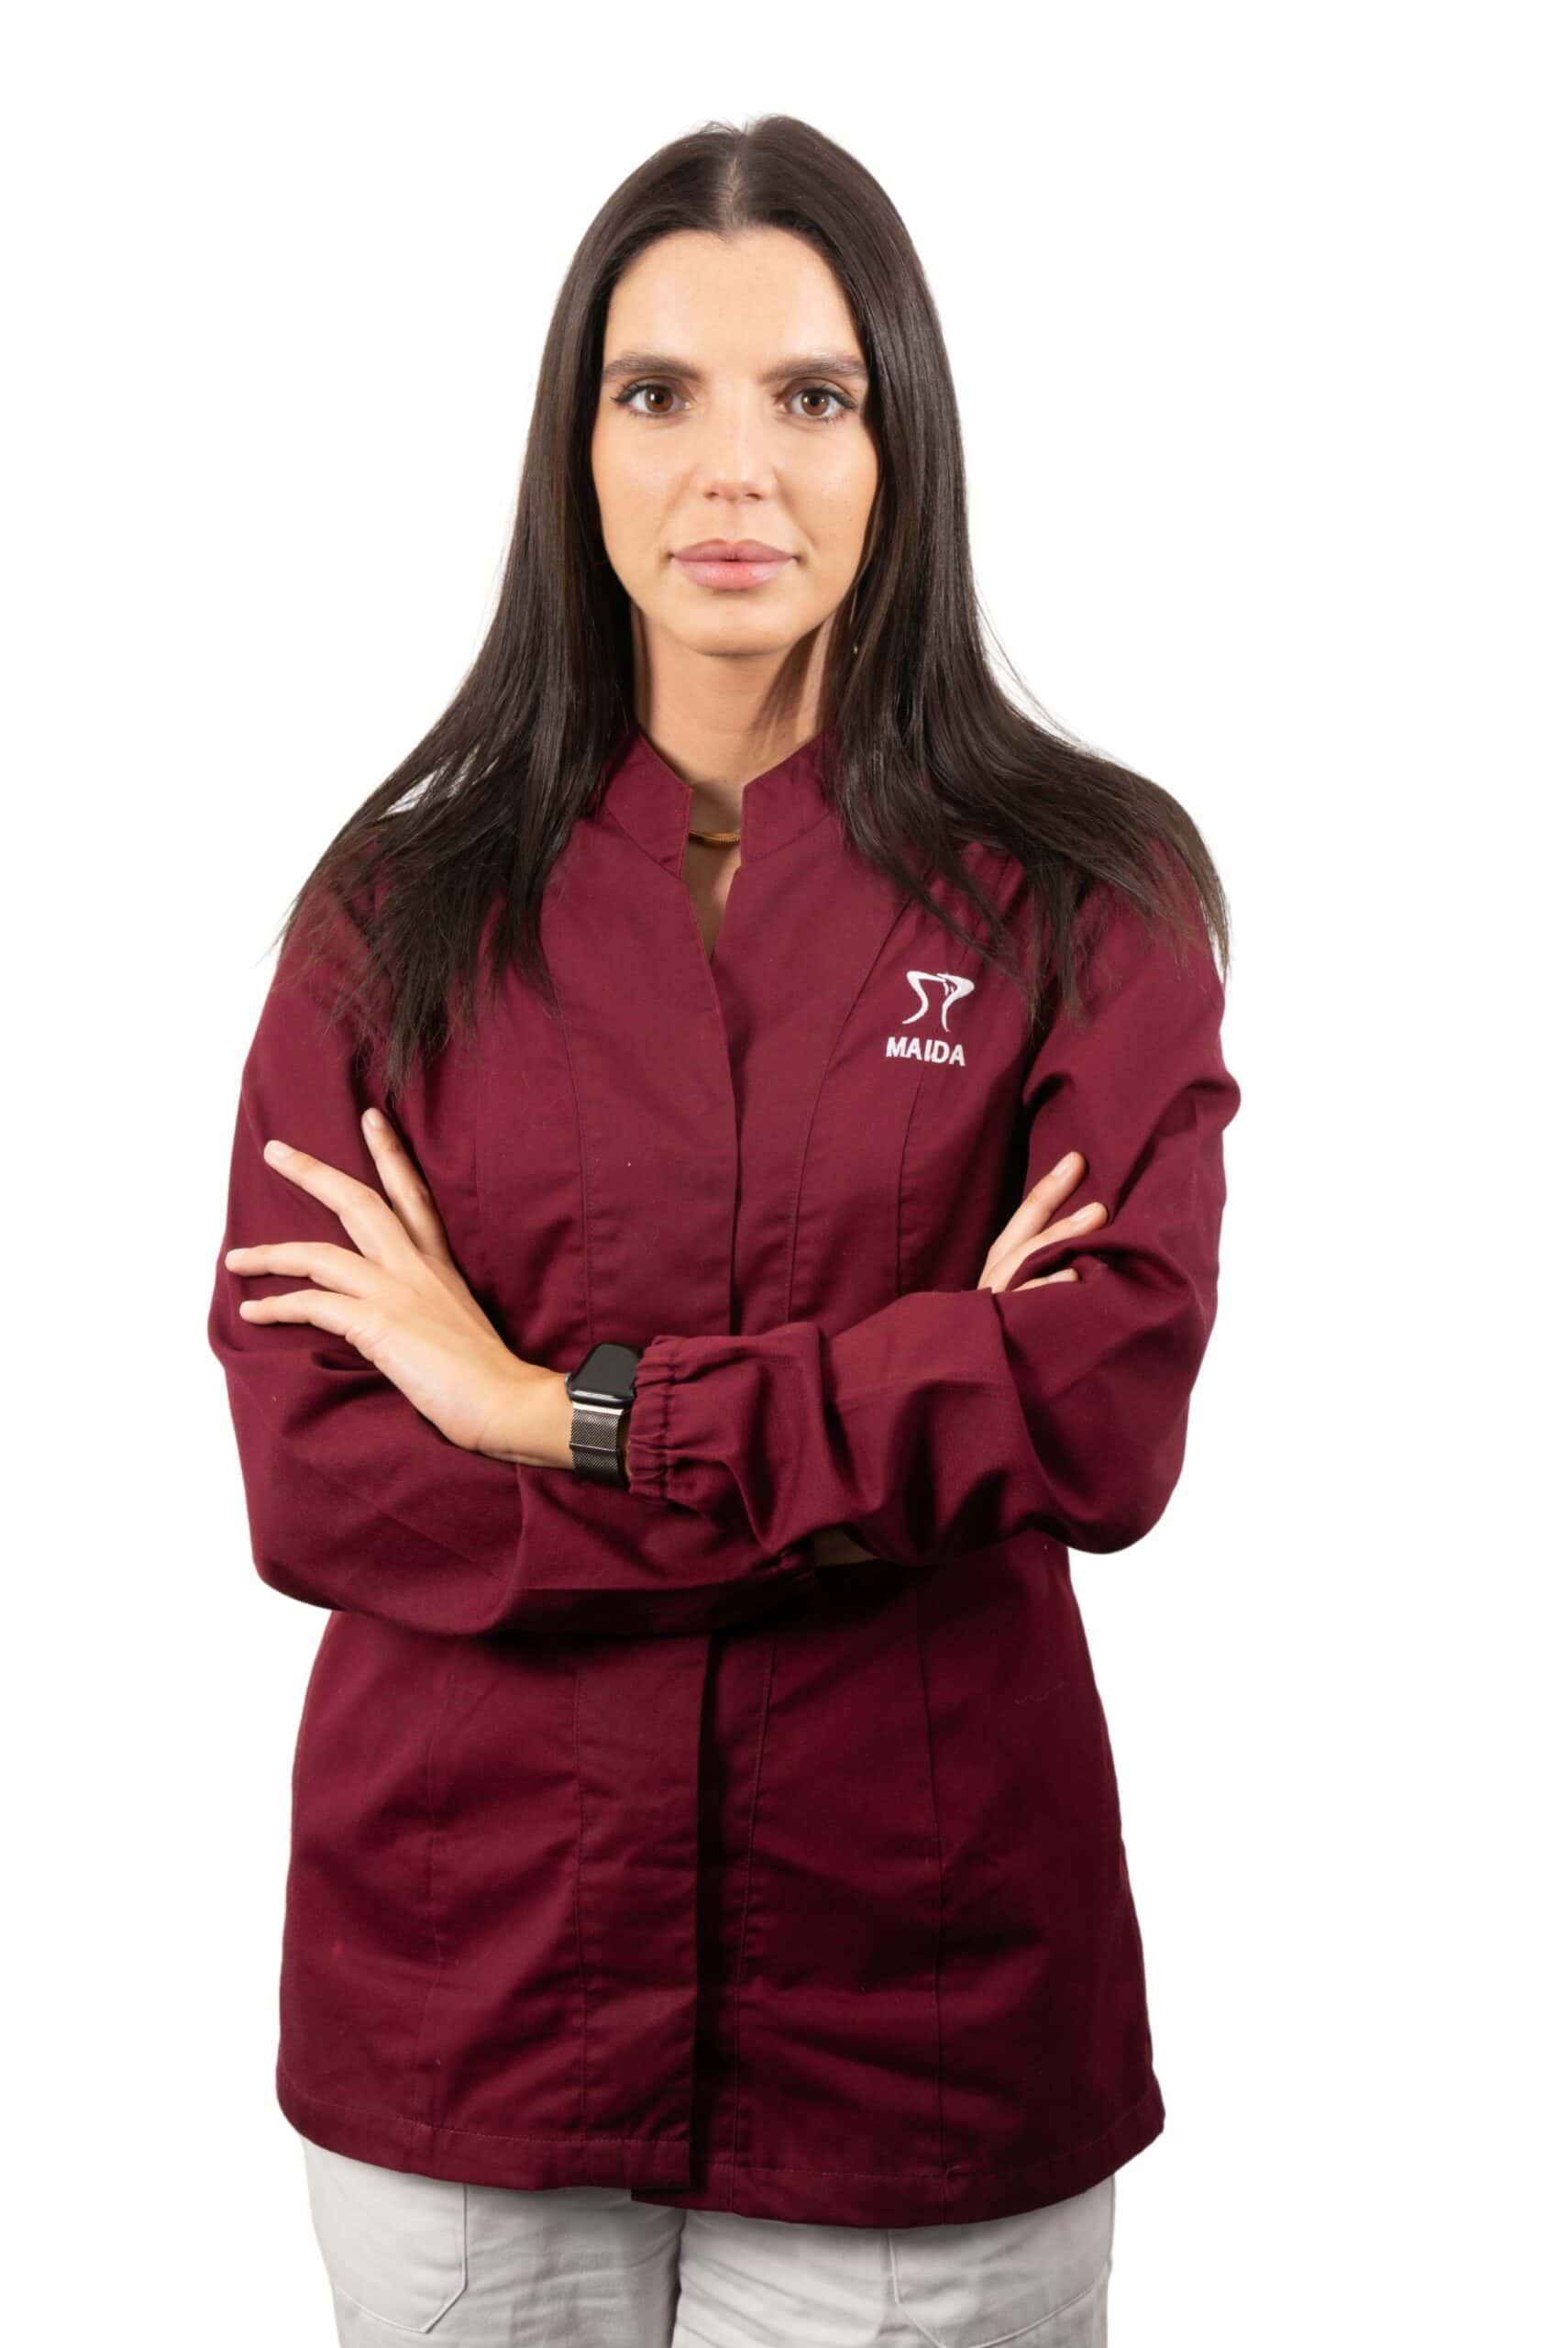 Woman in a burgundy Dentalmed Group uniform with arms crossed, wearing a watch, standing against a white background.